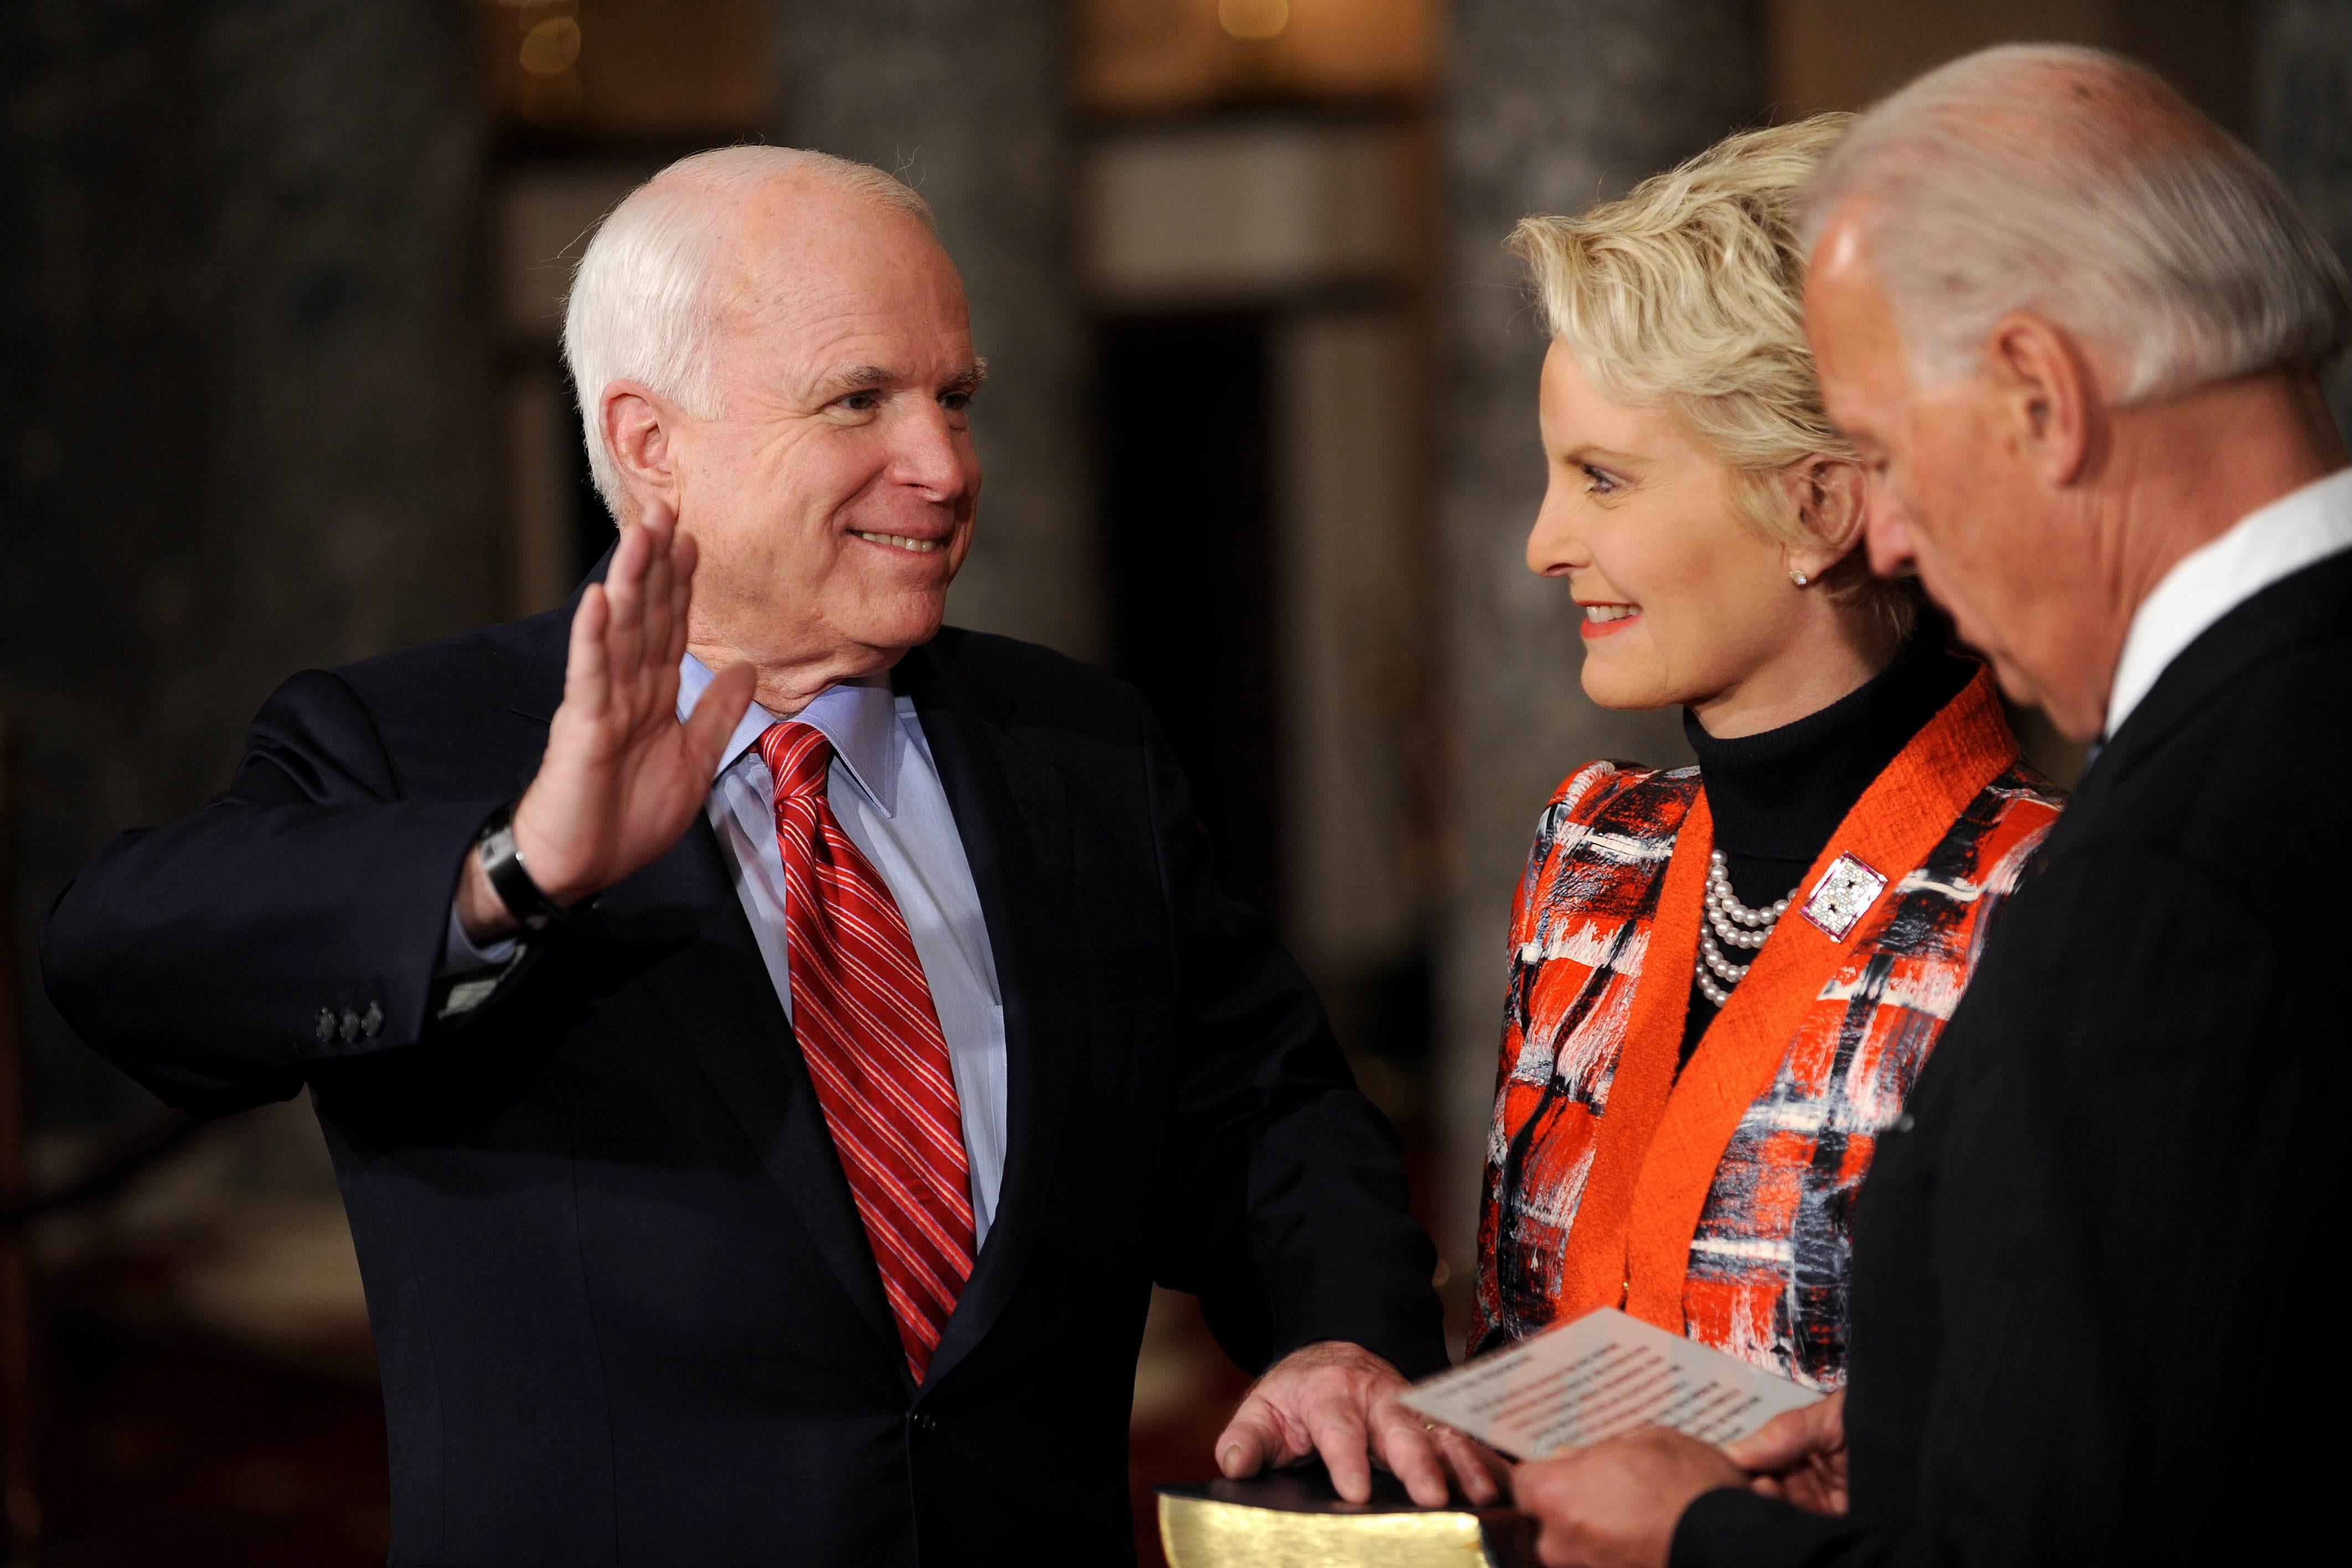 Cindy McCain holds a Bible on which John places his left hand as he raises his right hand. Joe Biden, in the foreground, reads from a piece of paper.